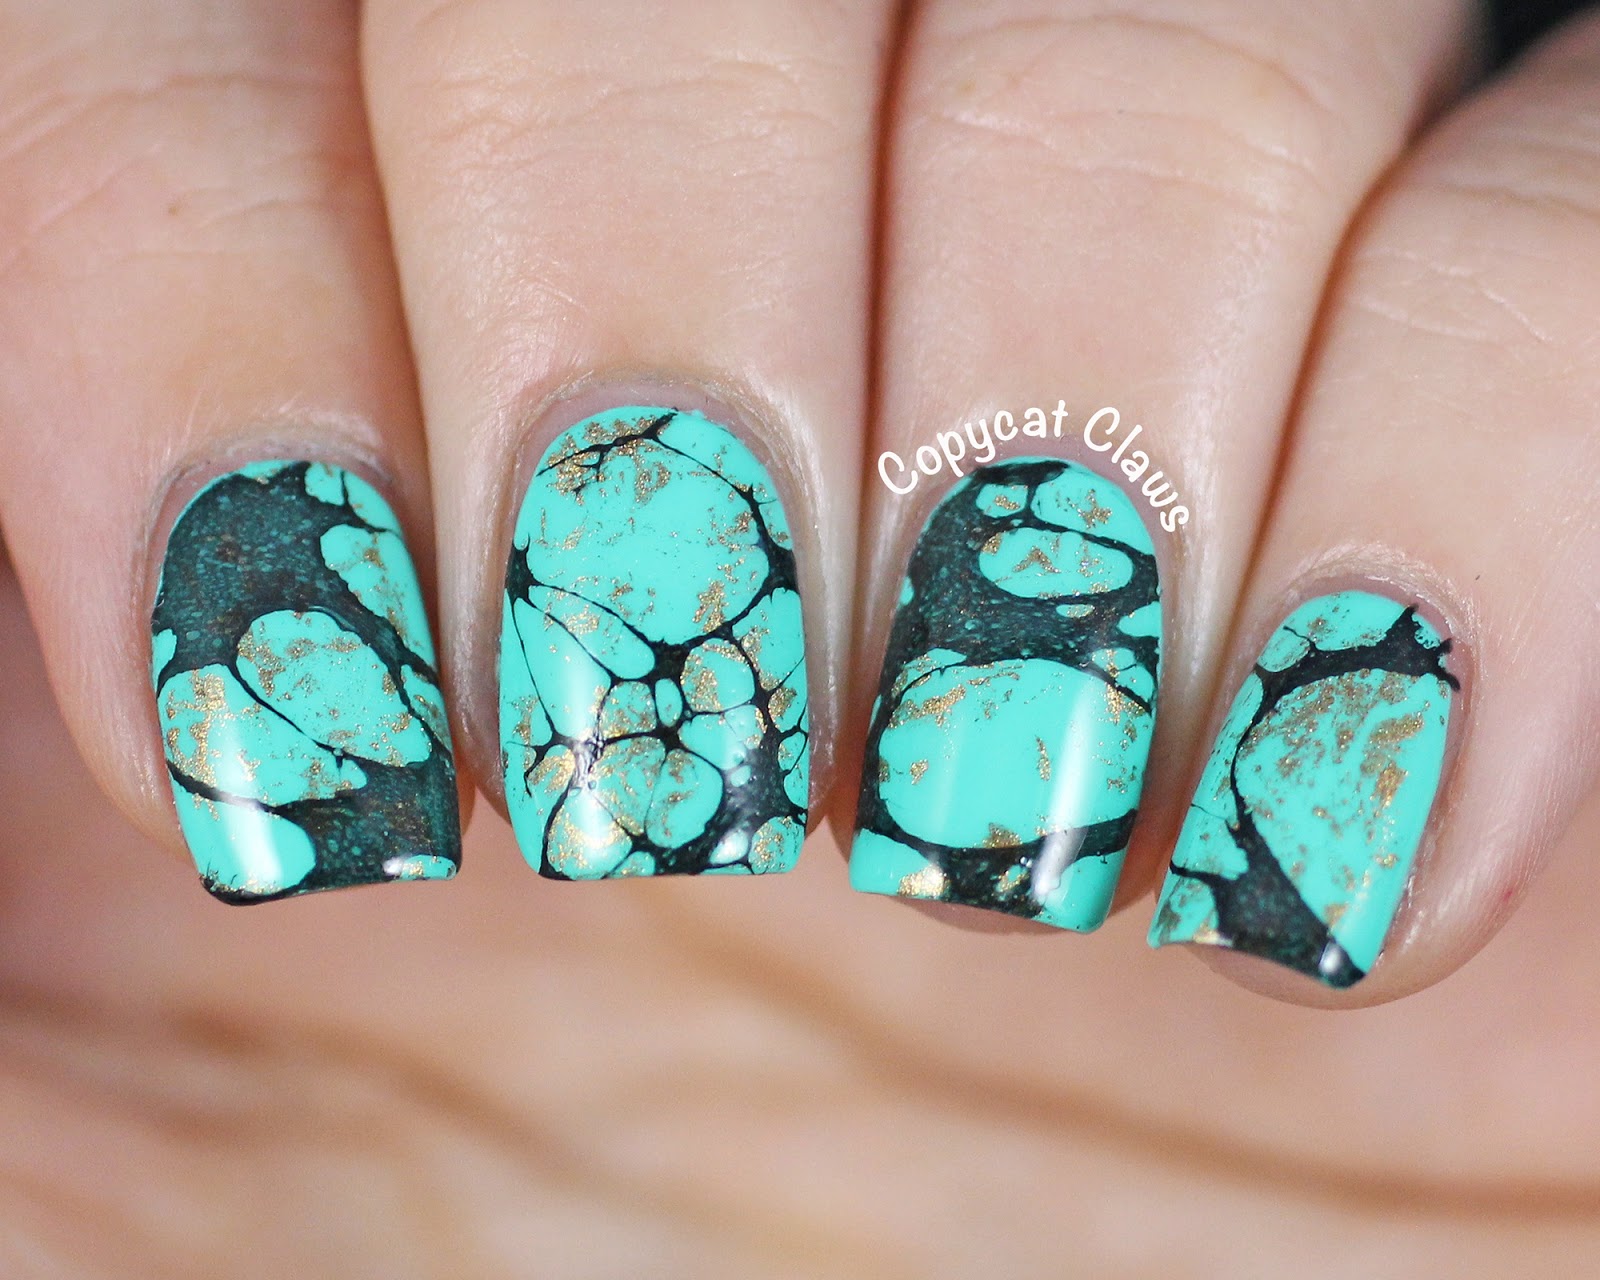 1. Oval Stone Nail Art Design - wide 8